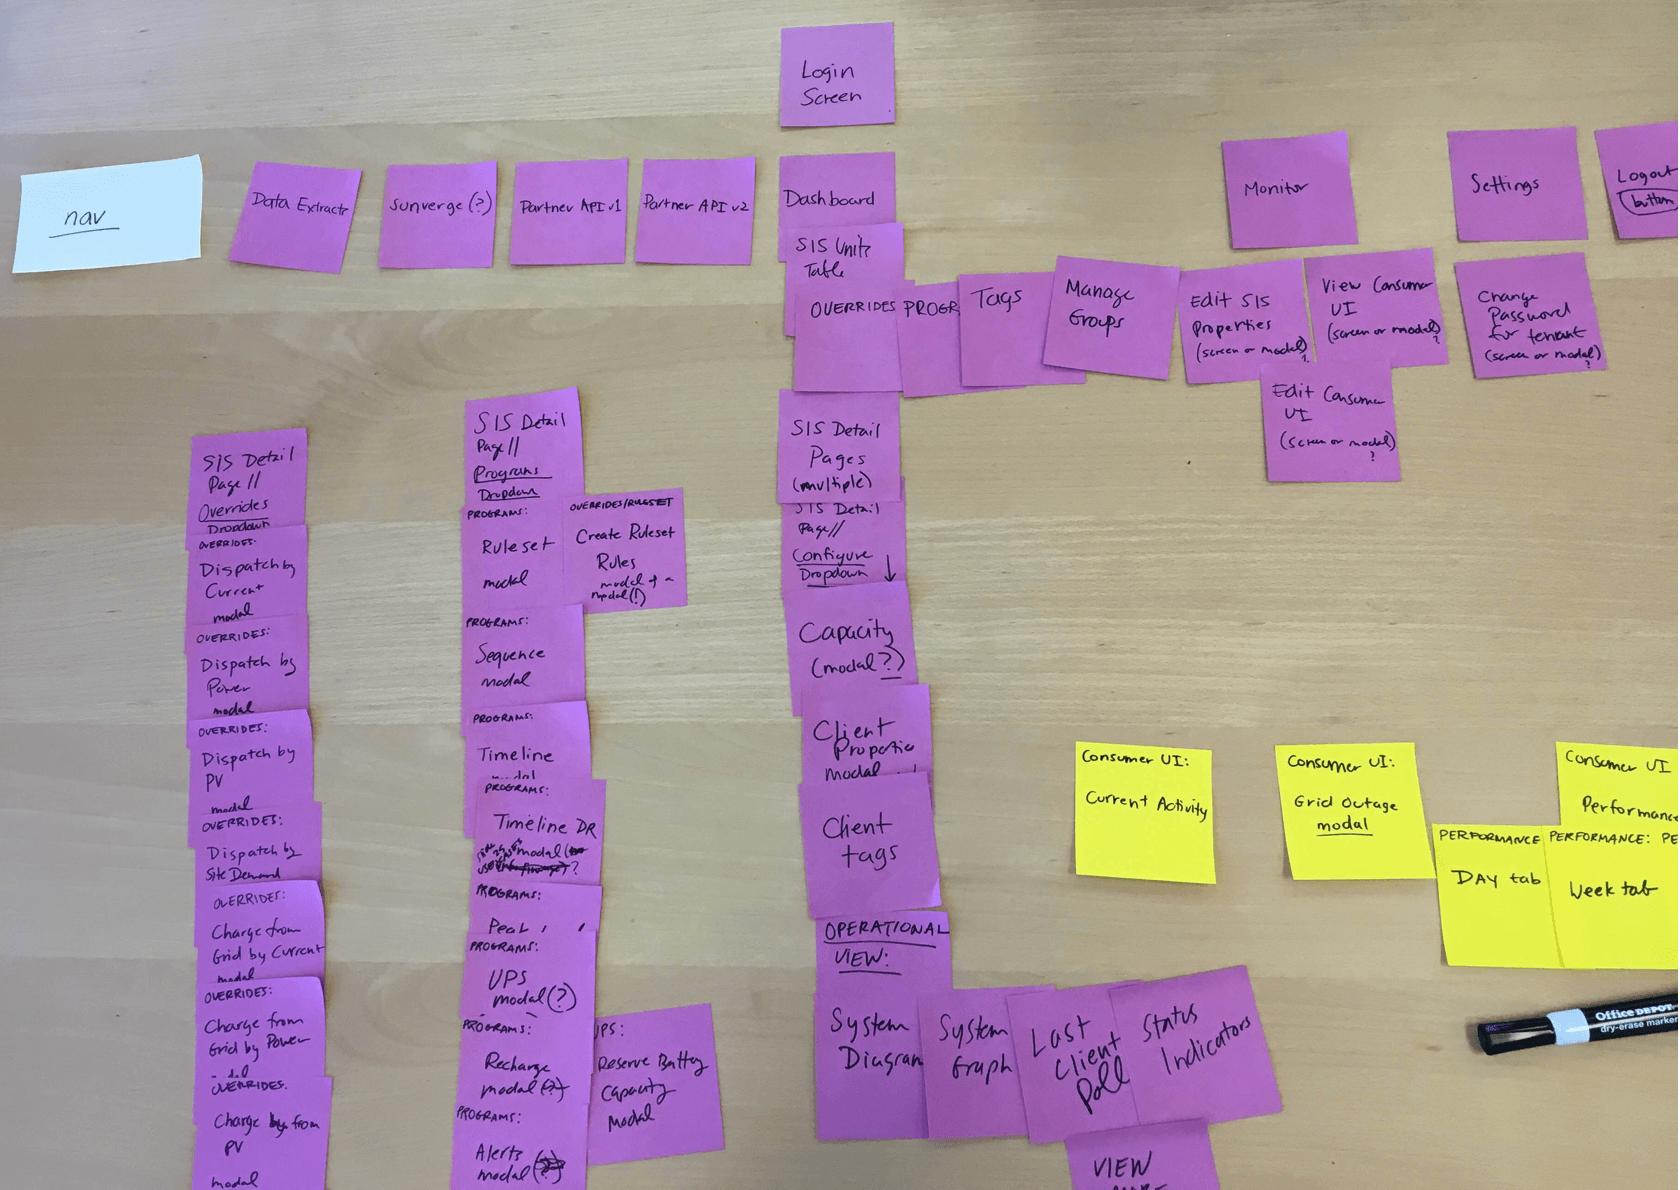 post-its map of existing information architecture